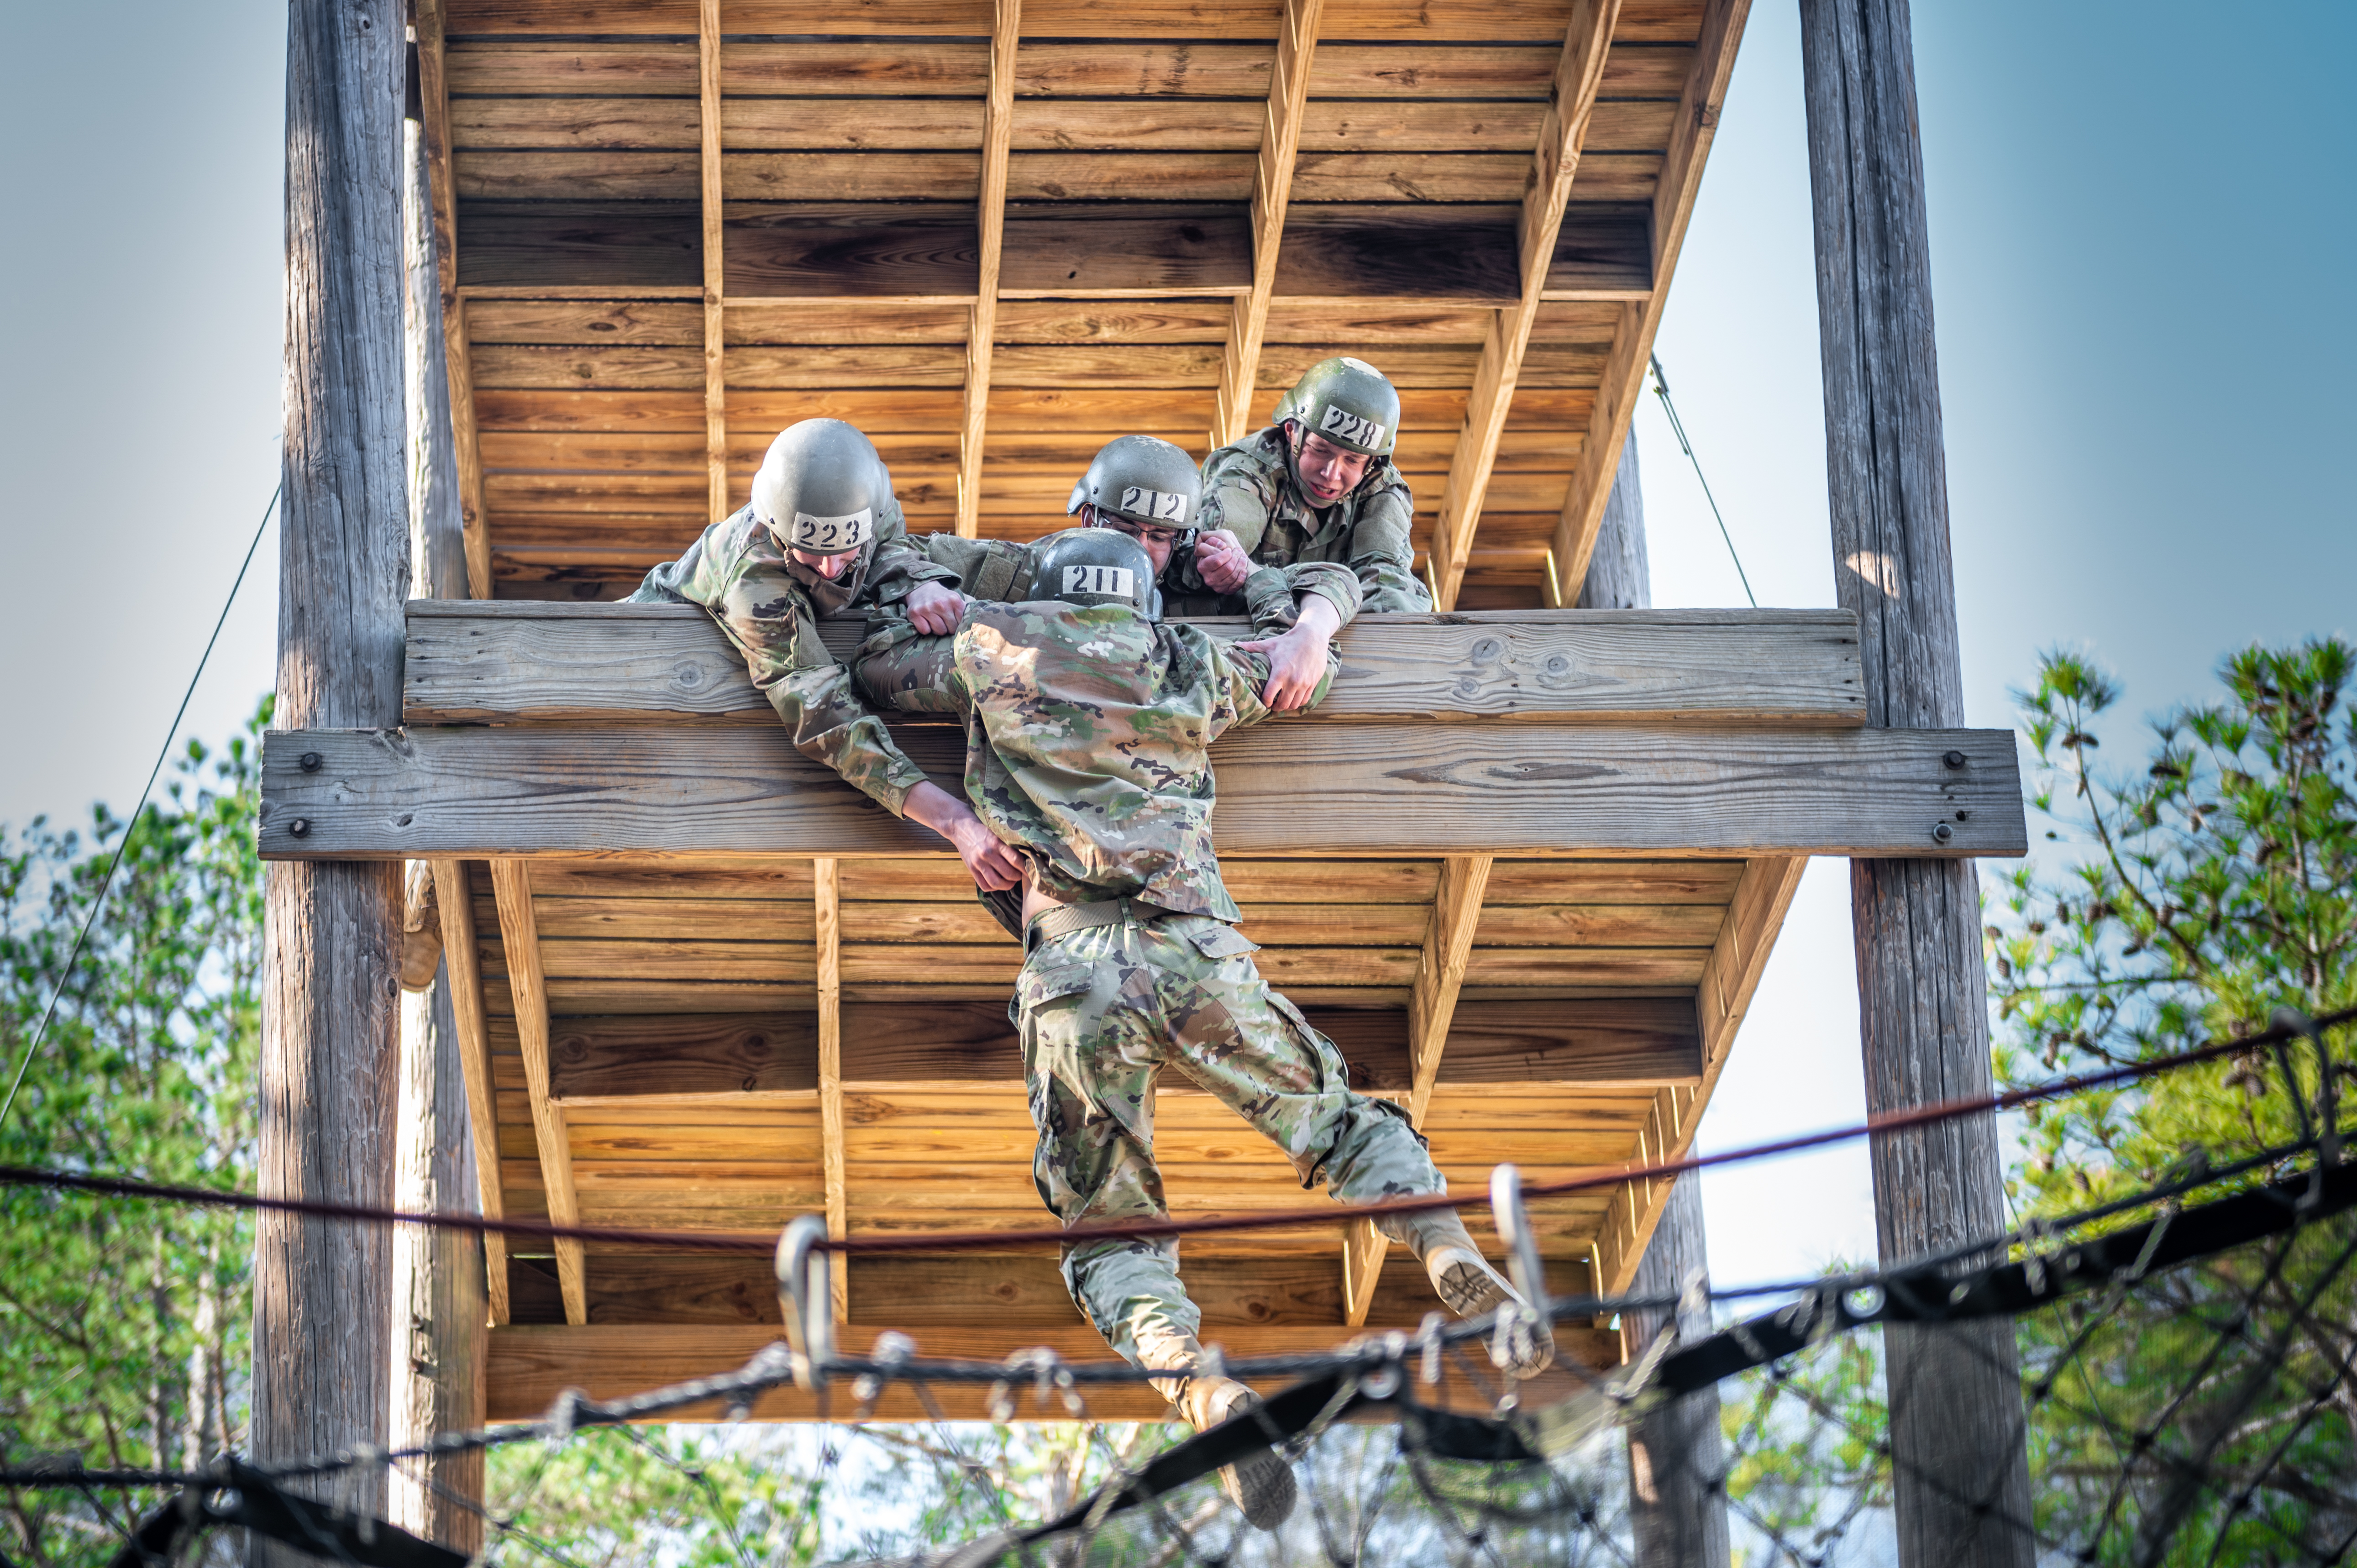 African American soldiers exhibit focus and strength in a rope